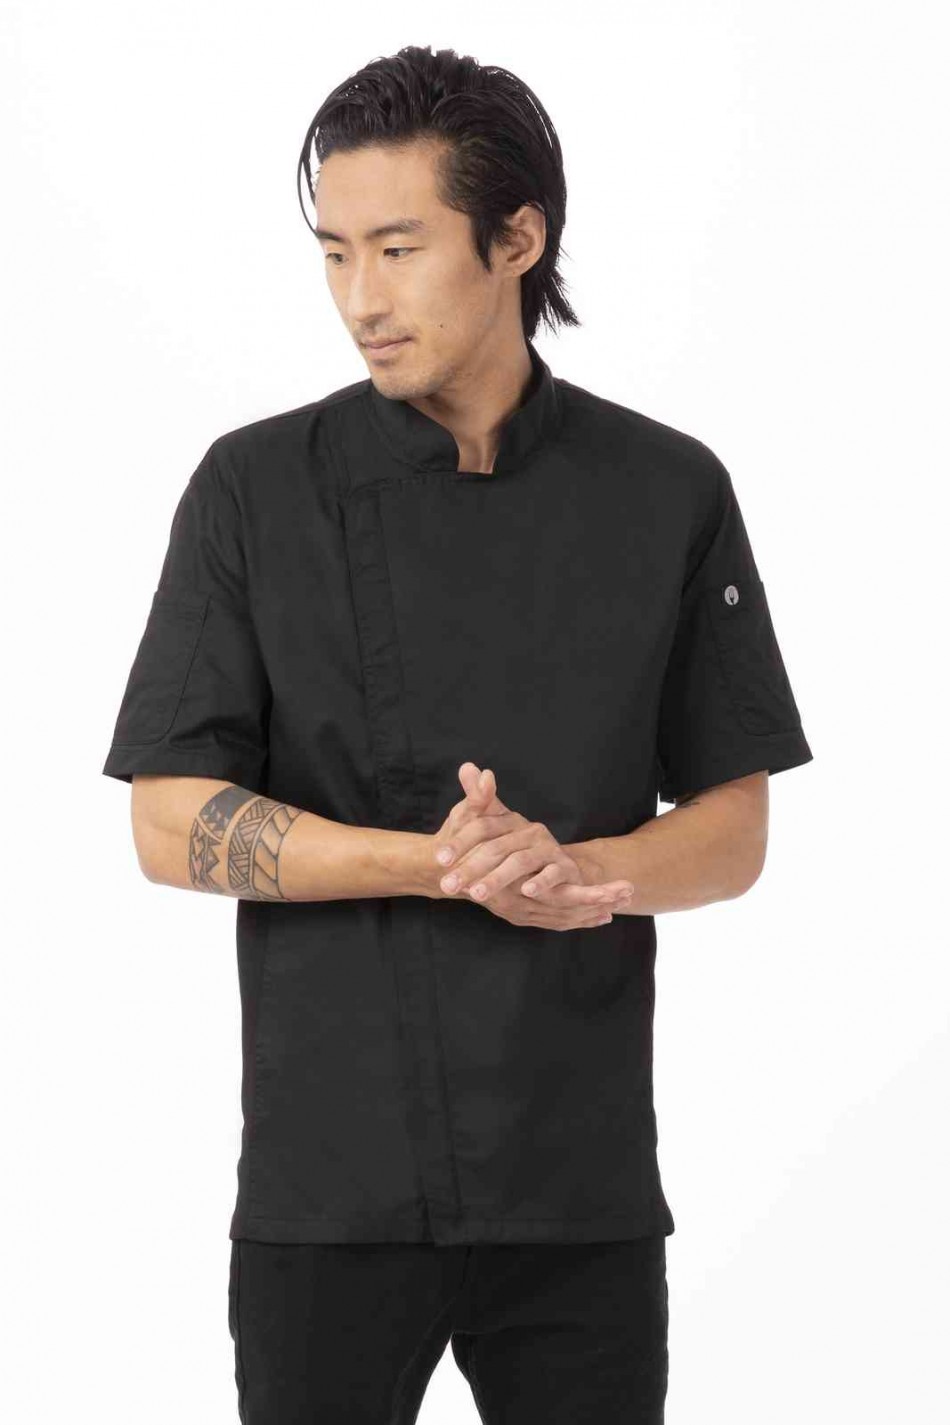 Springfield Mens Black Zipper Chef Jacket by Chef works